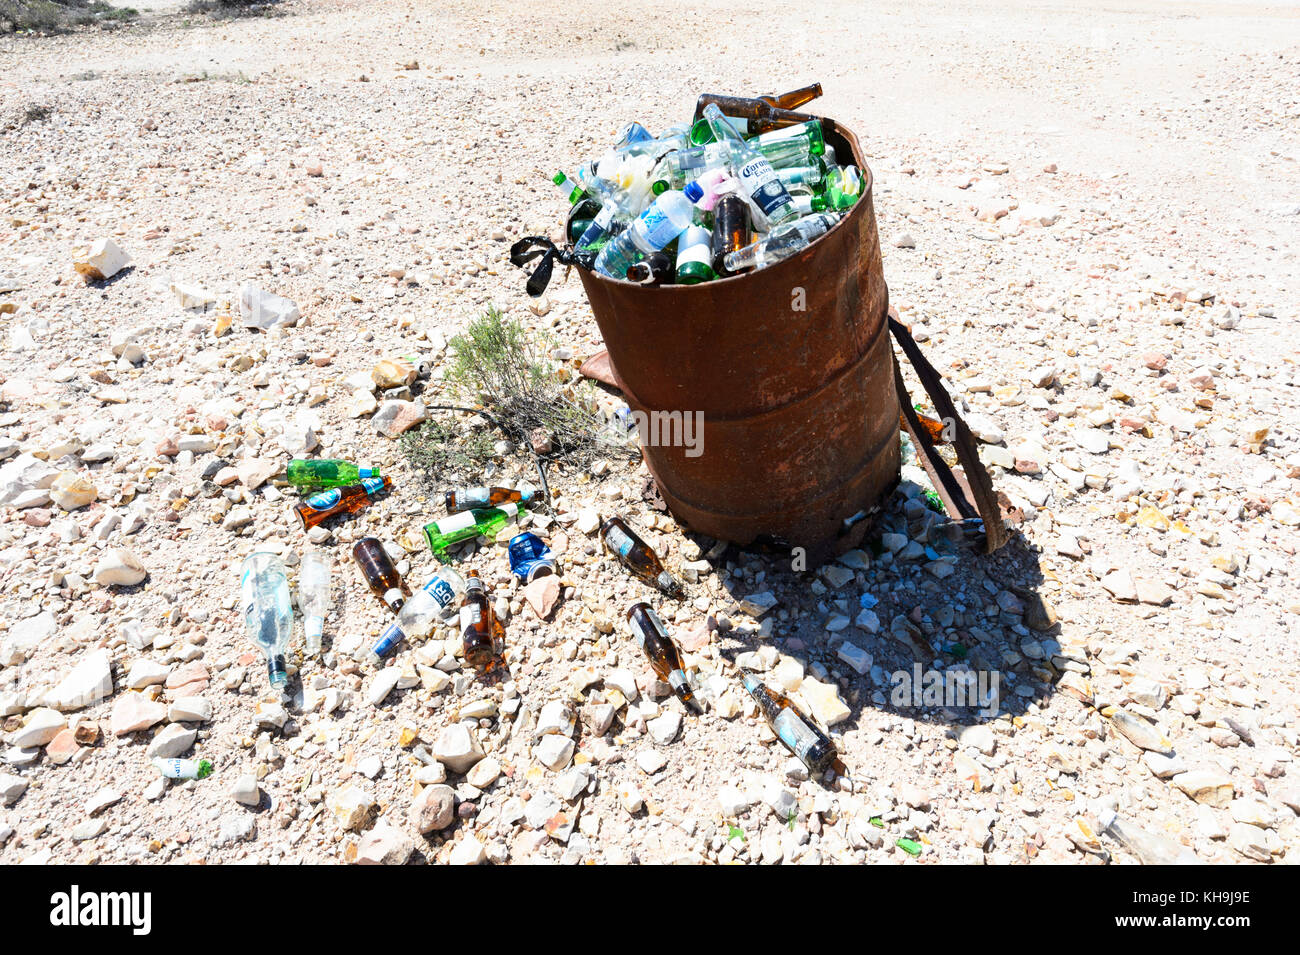 Bin overflowing with beer bottles, New South Wales, NSW, Australia Stock Photo